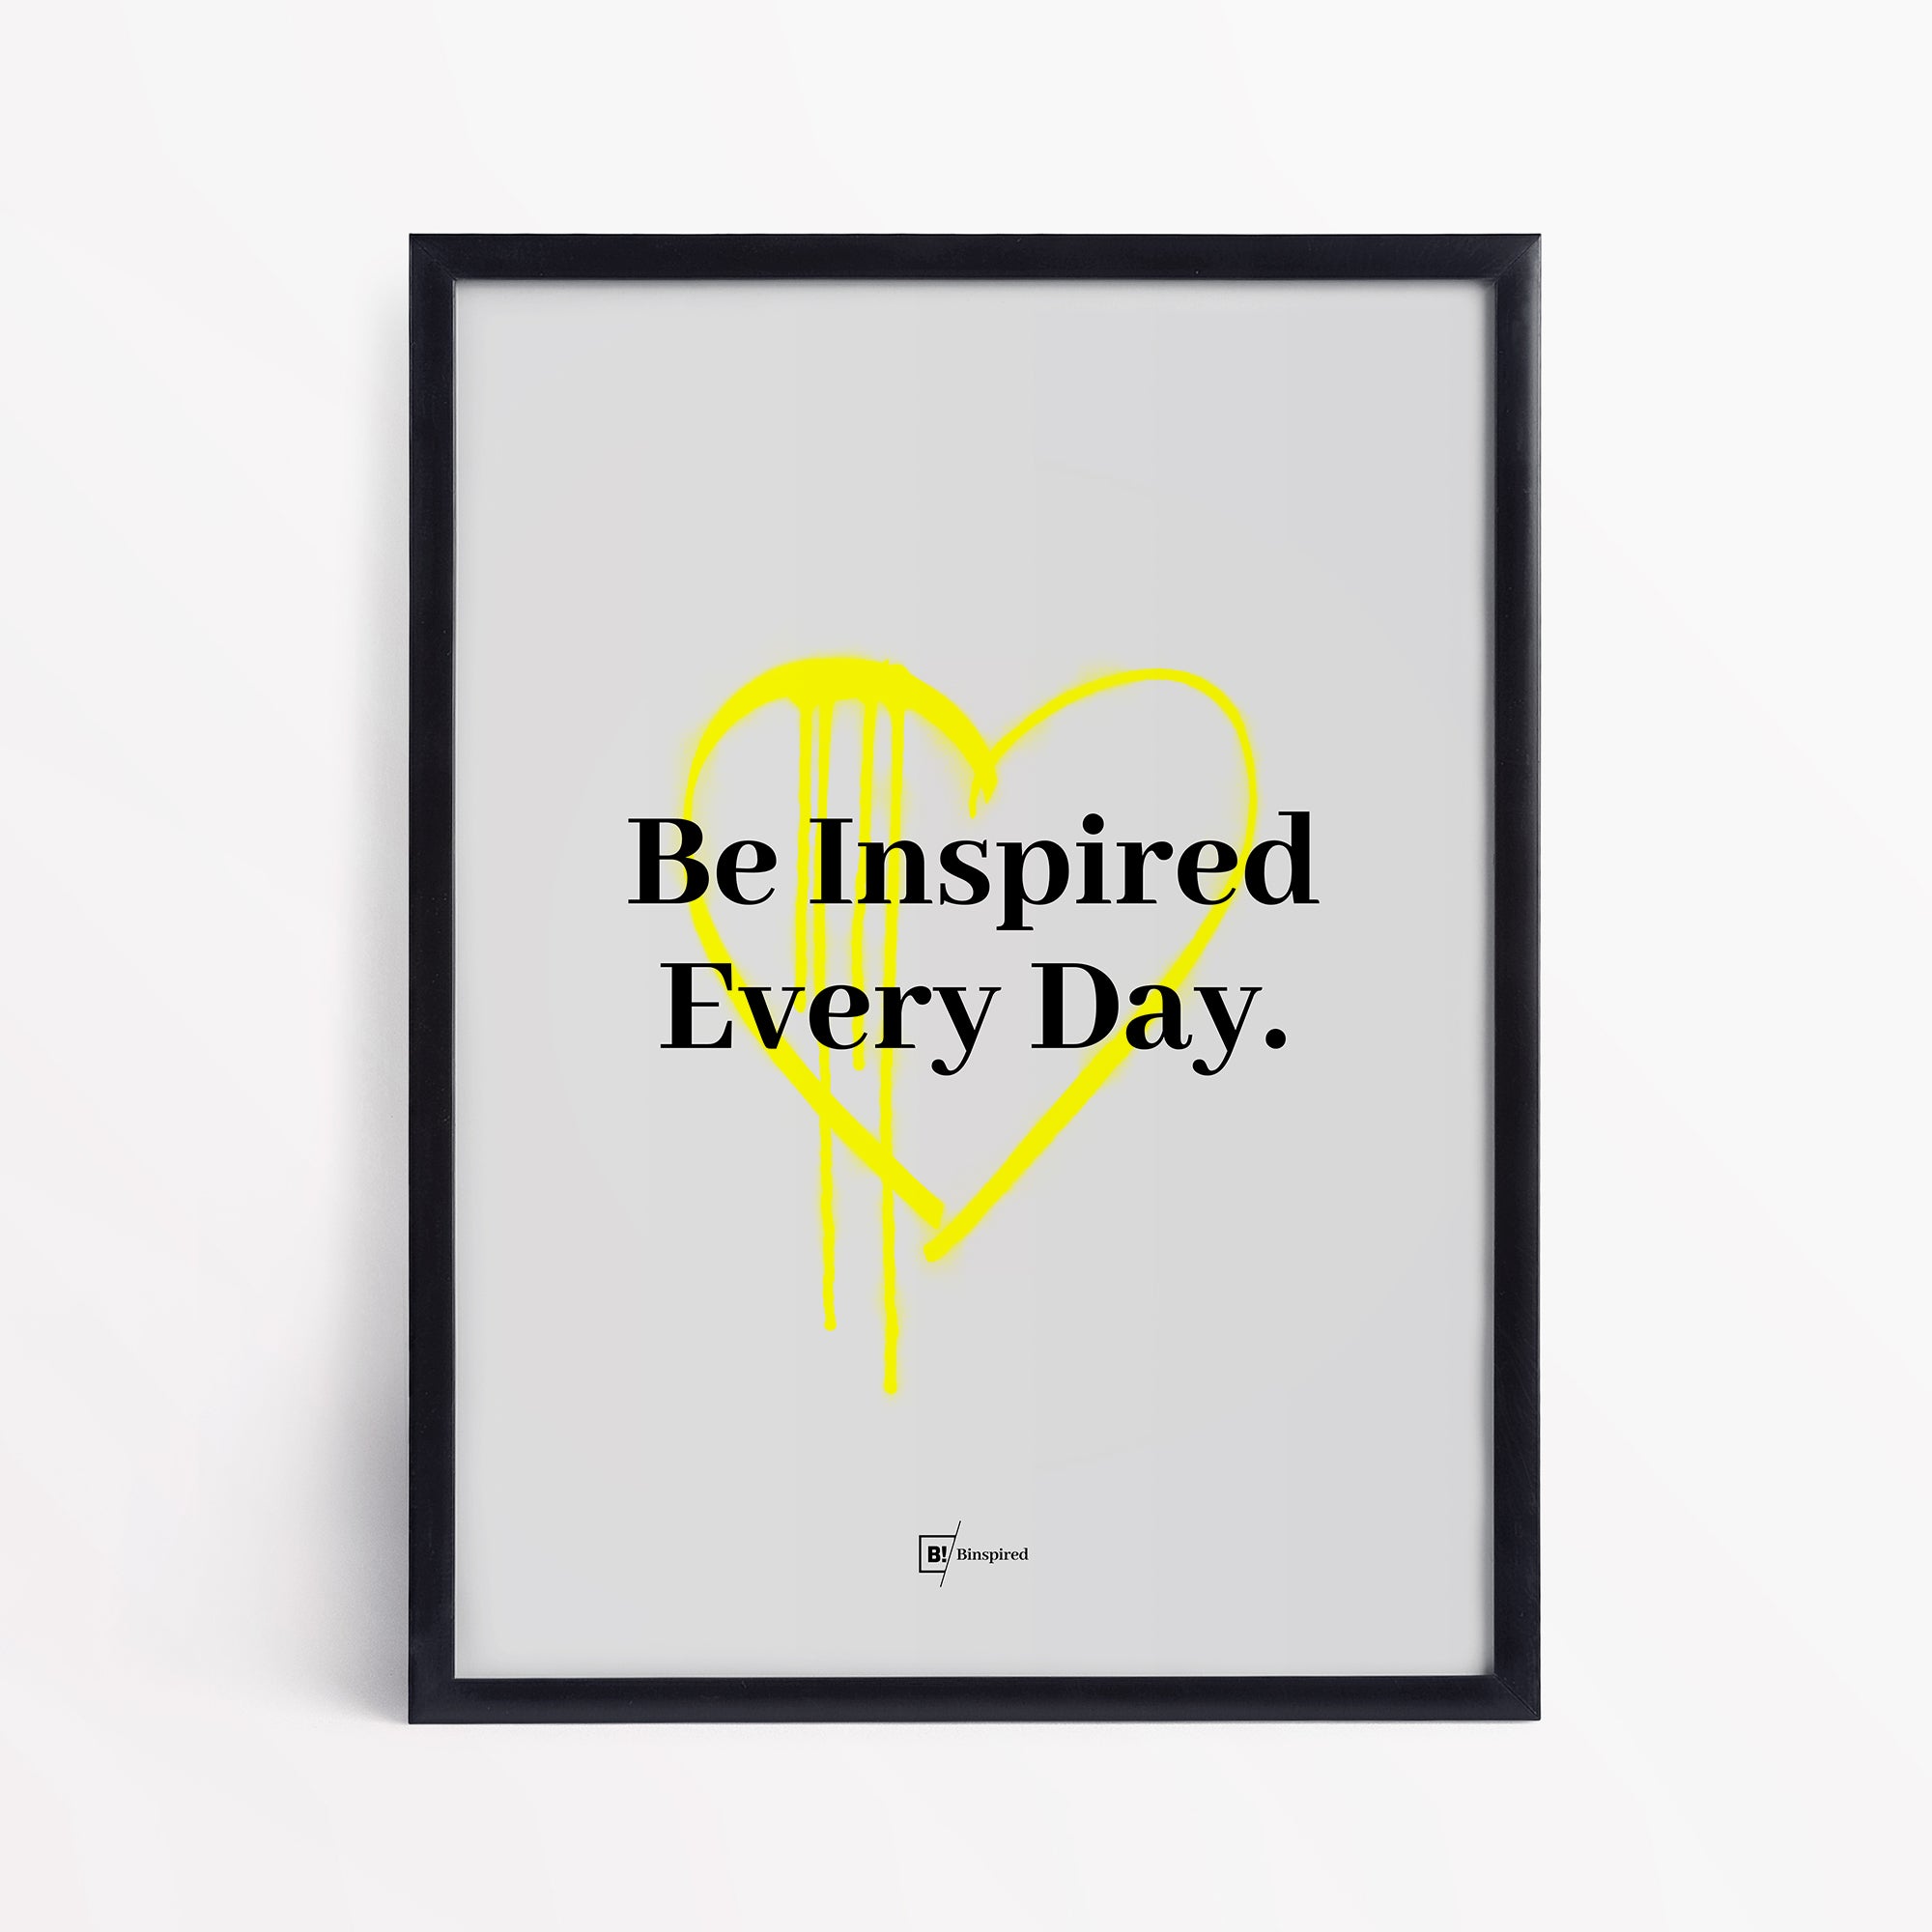 Be inspired by our "Be Inspired Every Day" quote art print! This artwork was printed using the giclée process on archival acid-free paper and is presented in a simple black frame that captures its timeless beauty in every detail.